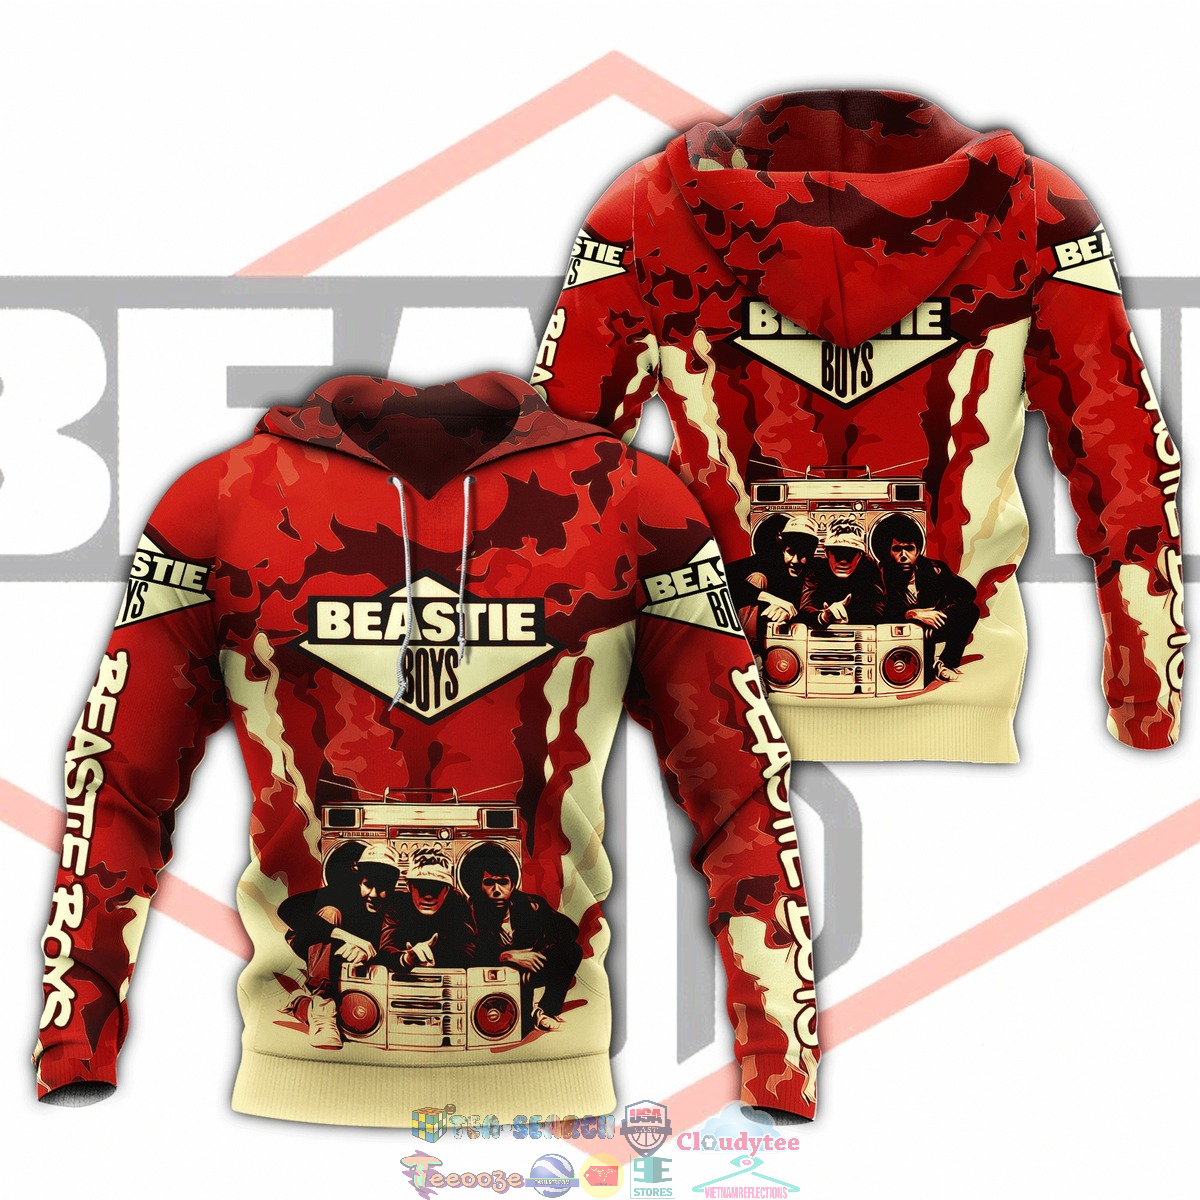 Beastie Boys Band ver 4 3D hoodie and t-shirt